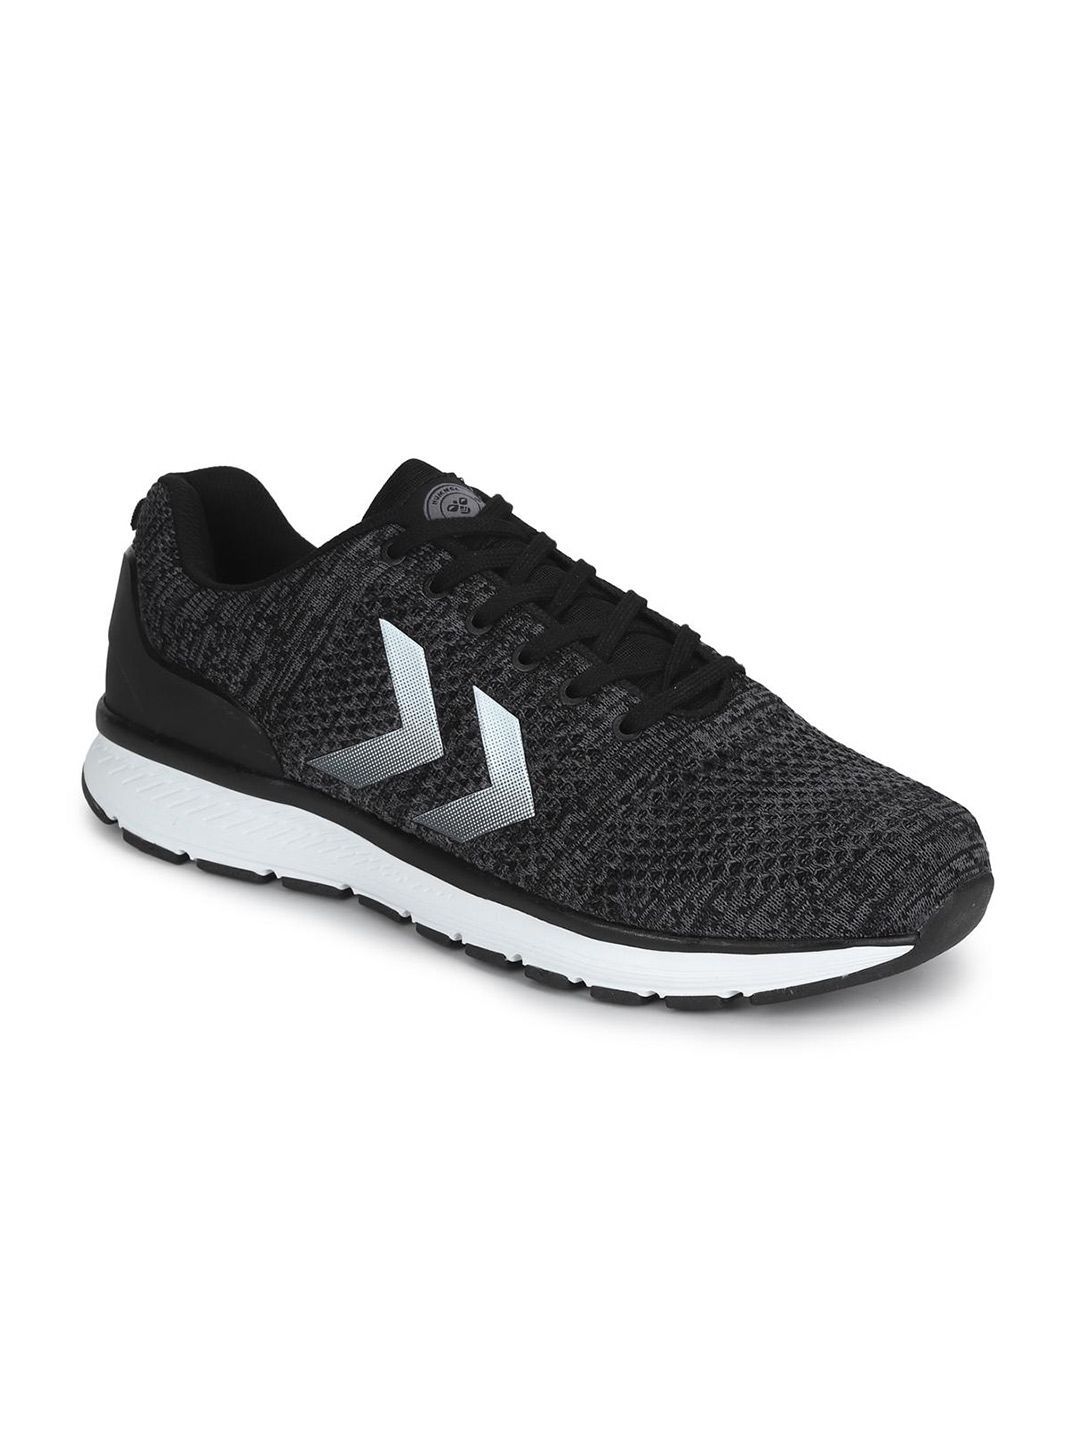 hummel Unisex Grey Mesh Training or Gym Non-Marking Shoes Price in India